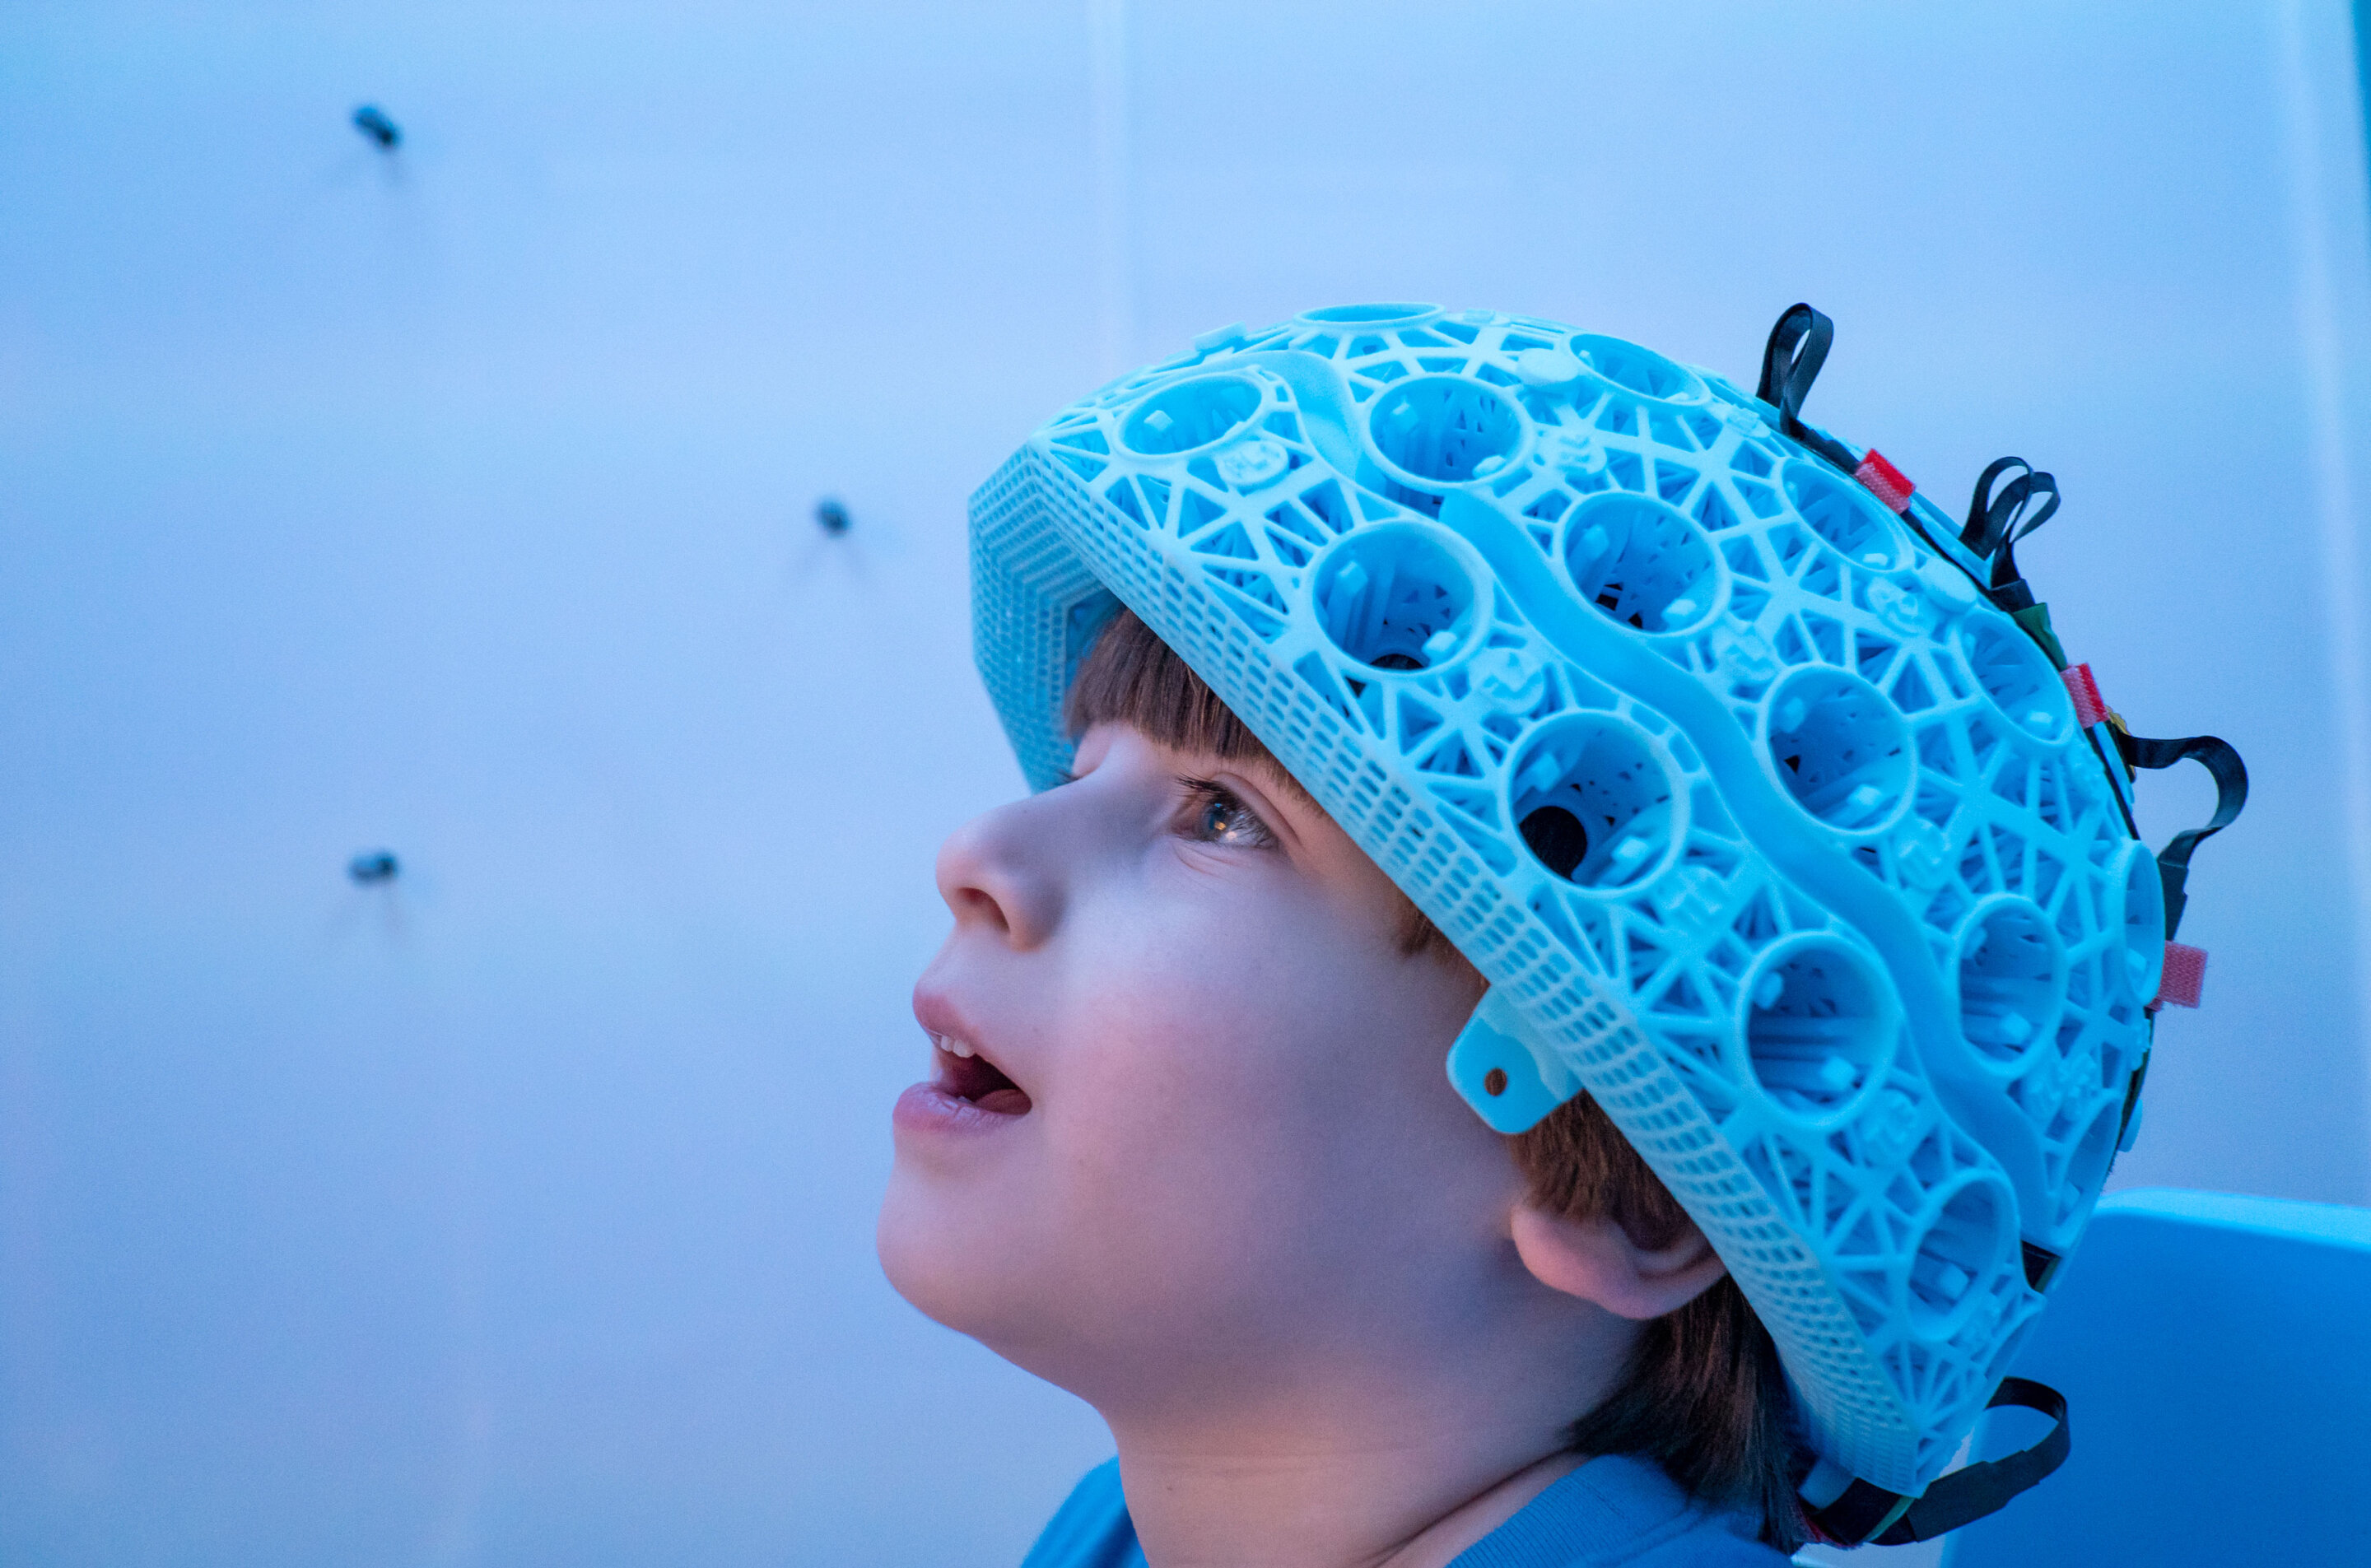 Wearable brain imaging provides a precise picture of children’s developing brains